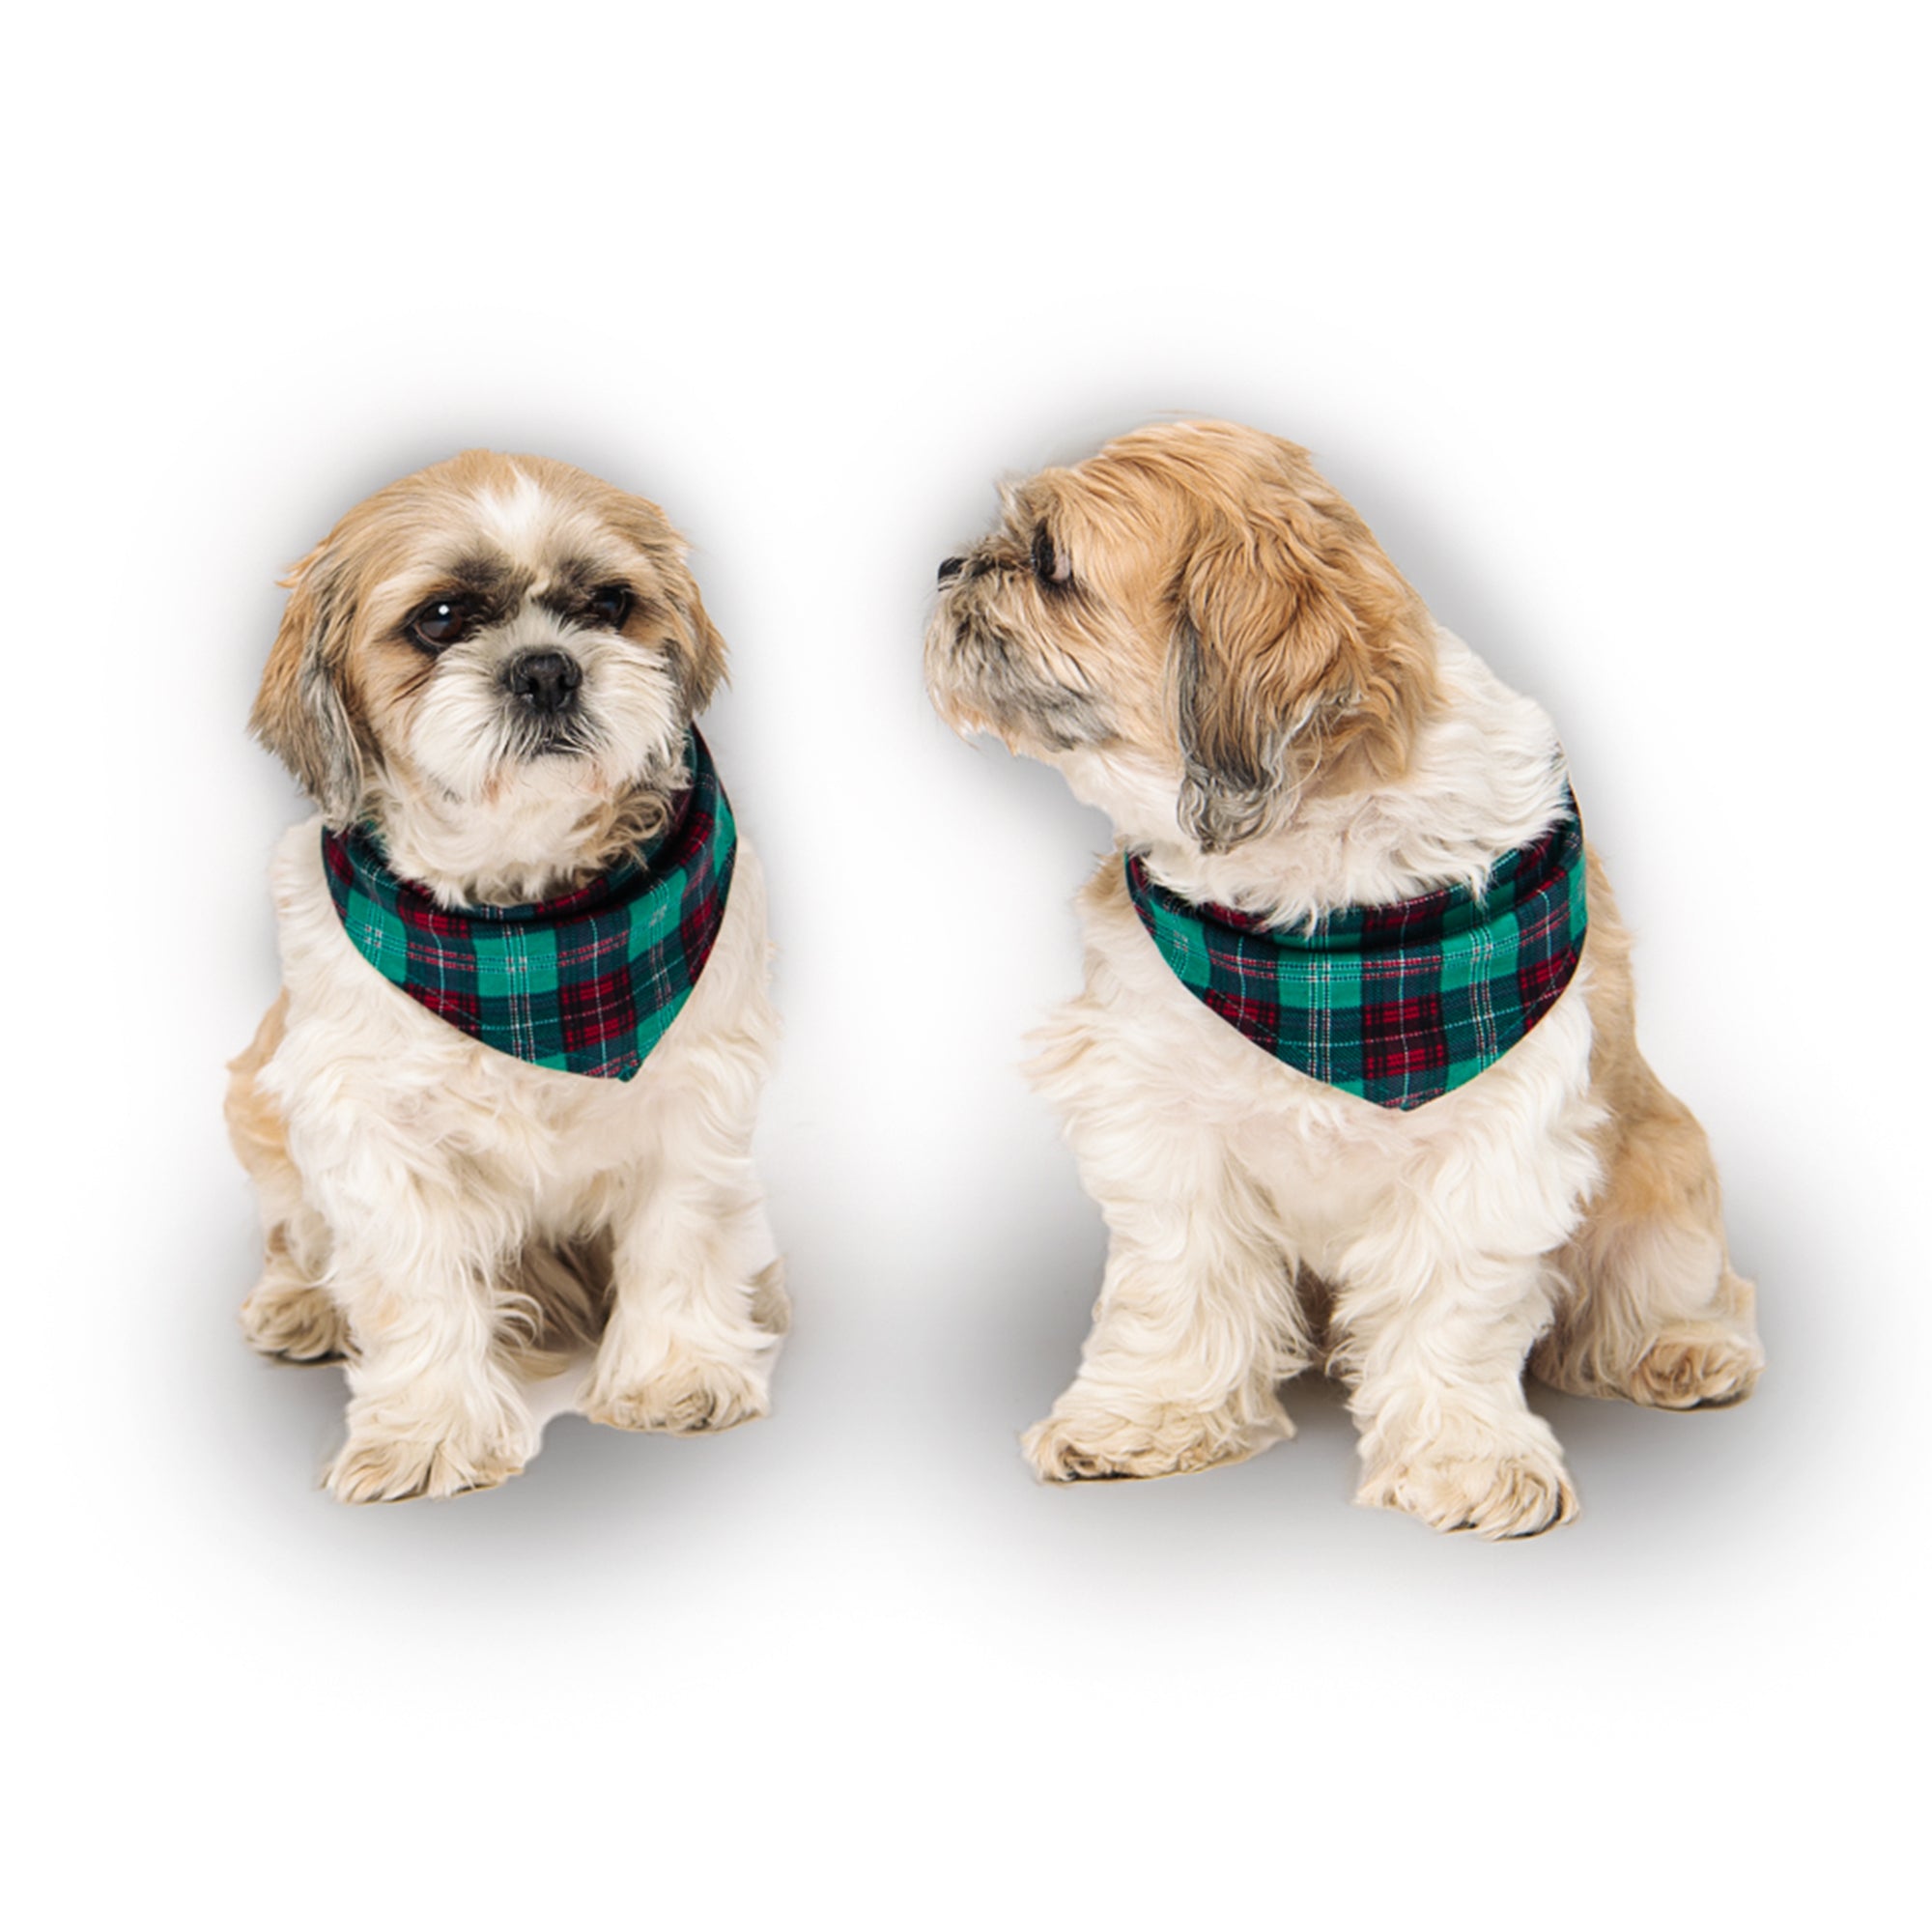 Go With The Snow! Plaid Bandana for Dogs